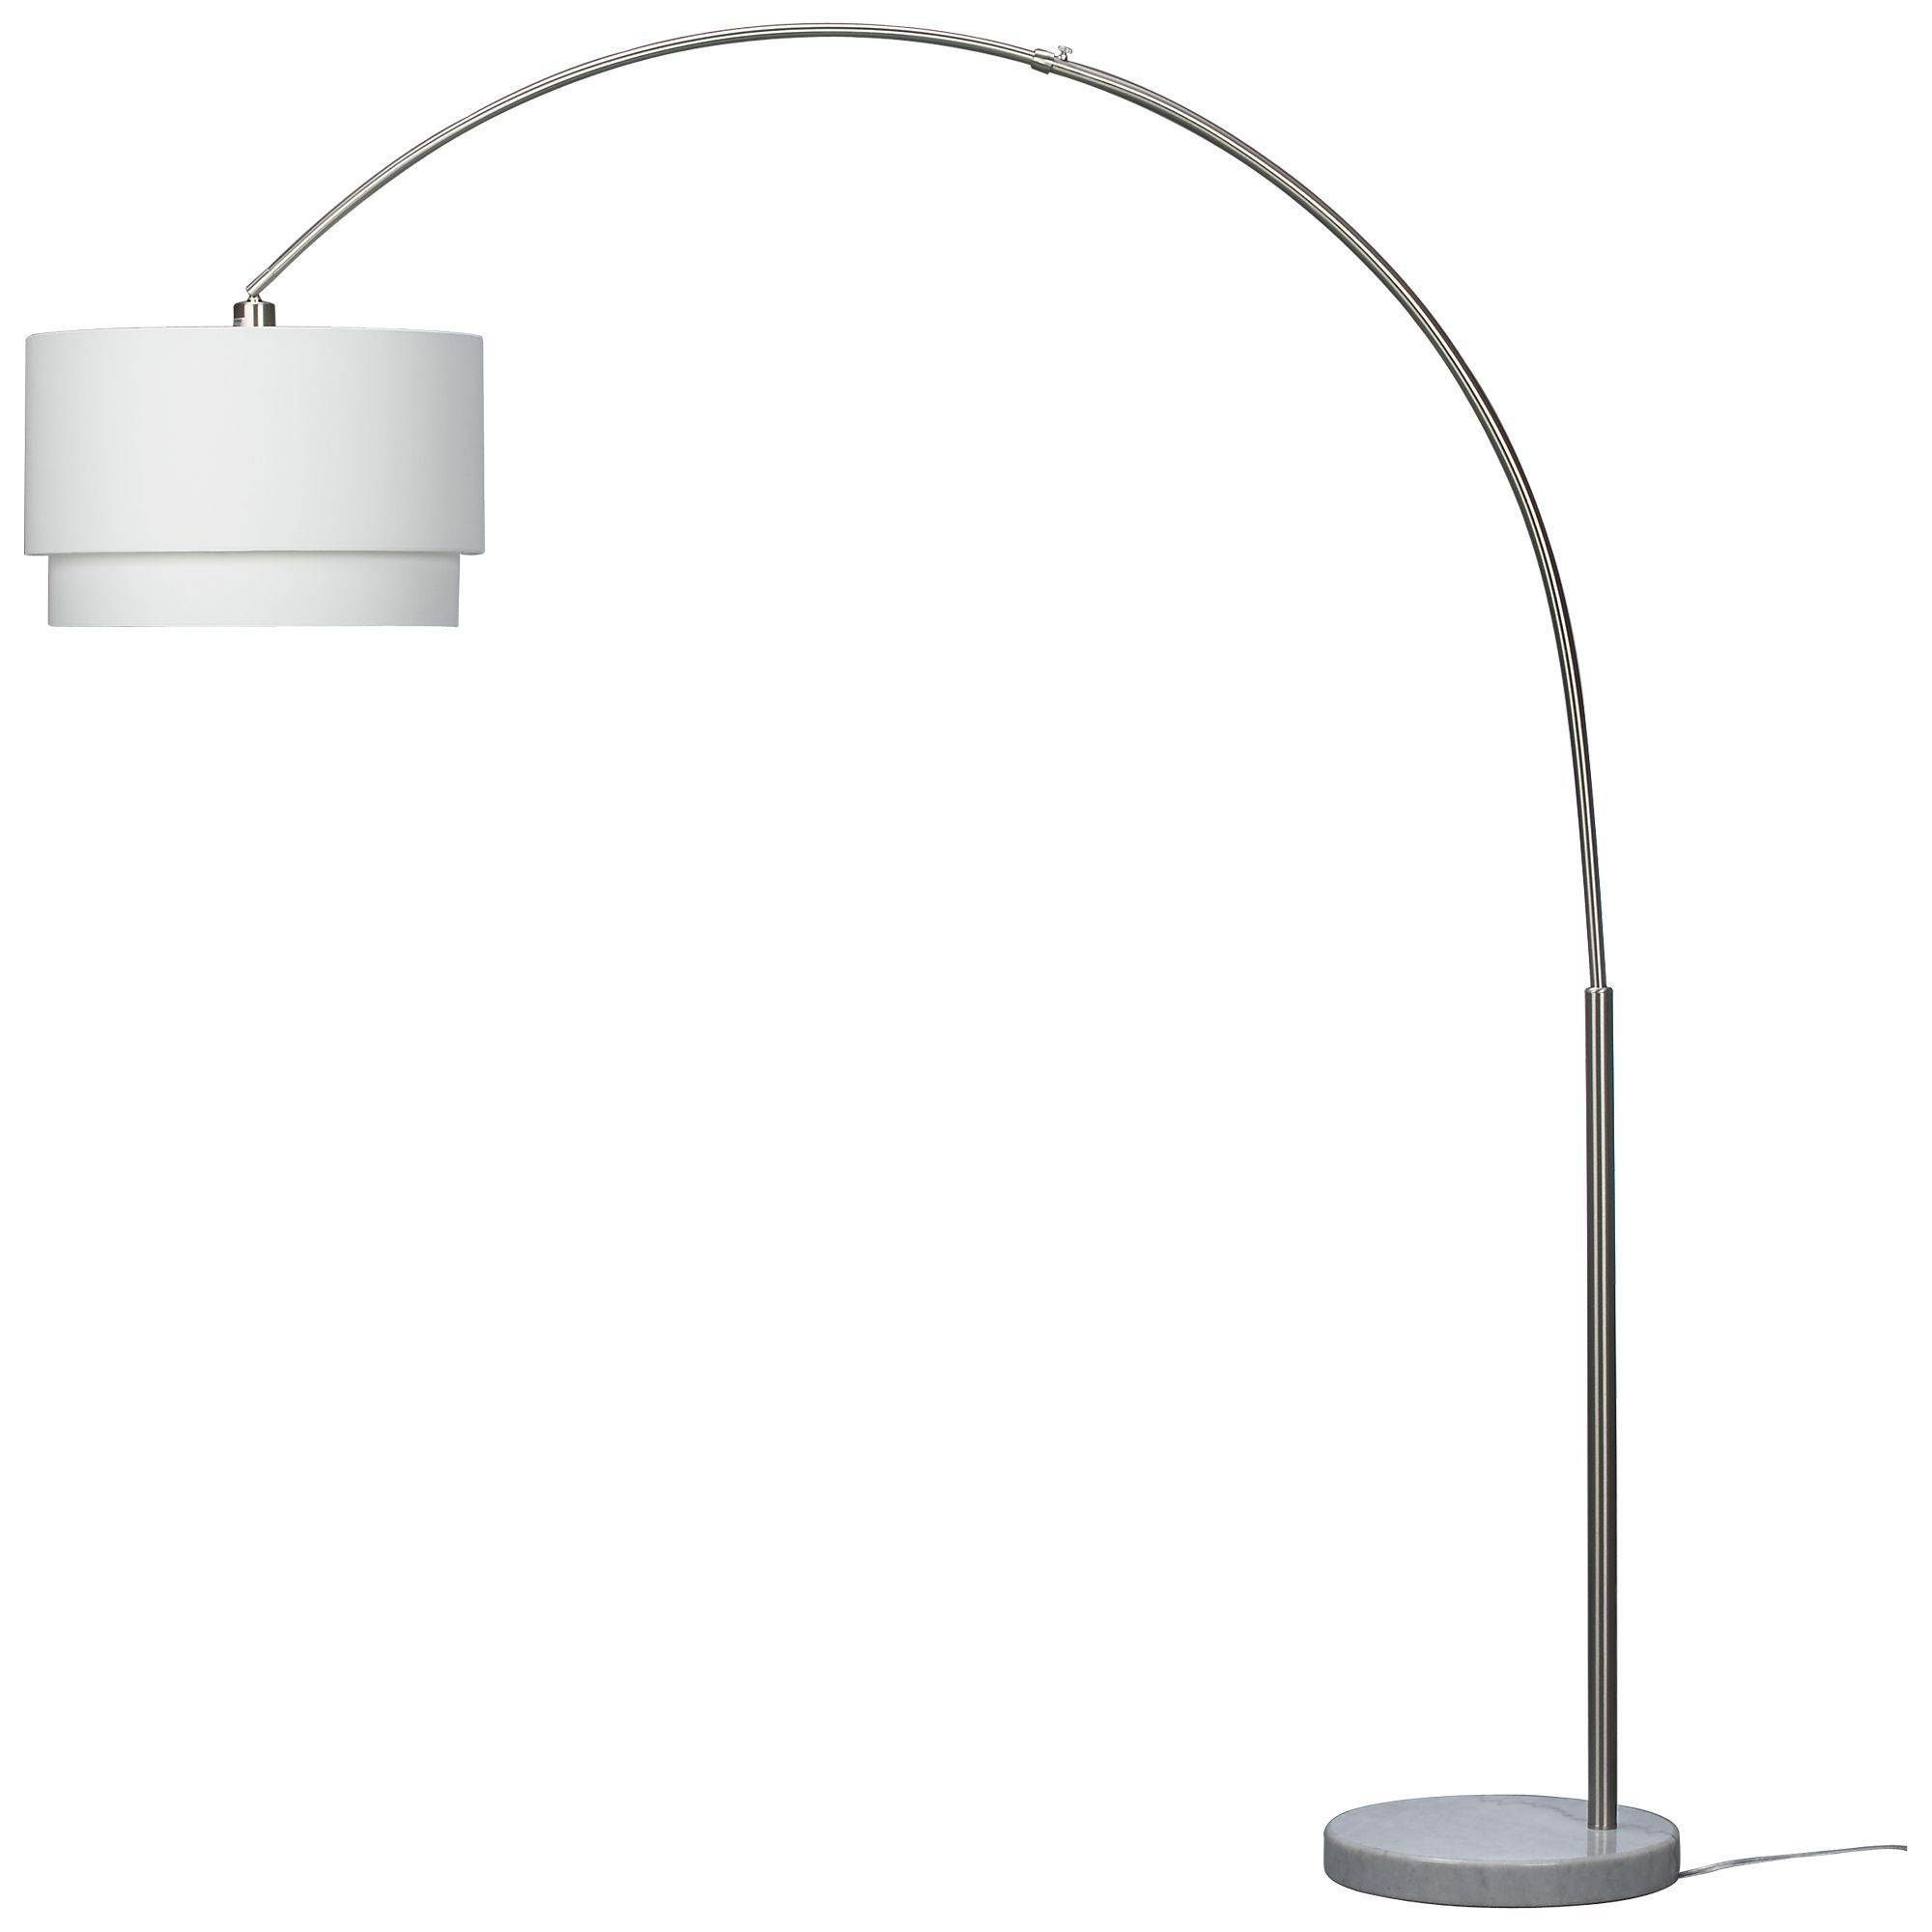 Meryl Arc Floor Lamp Reviews Crate And Barrel Arc in sizing 2000 X 2000